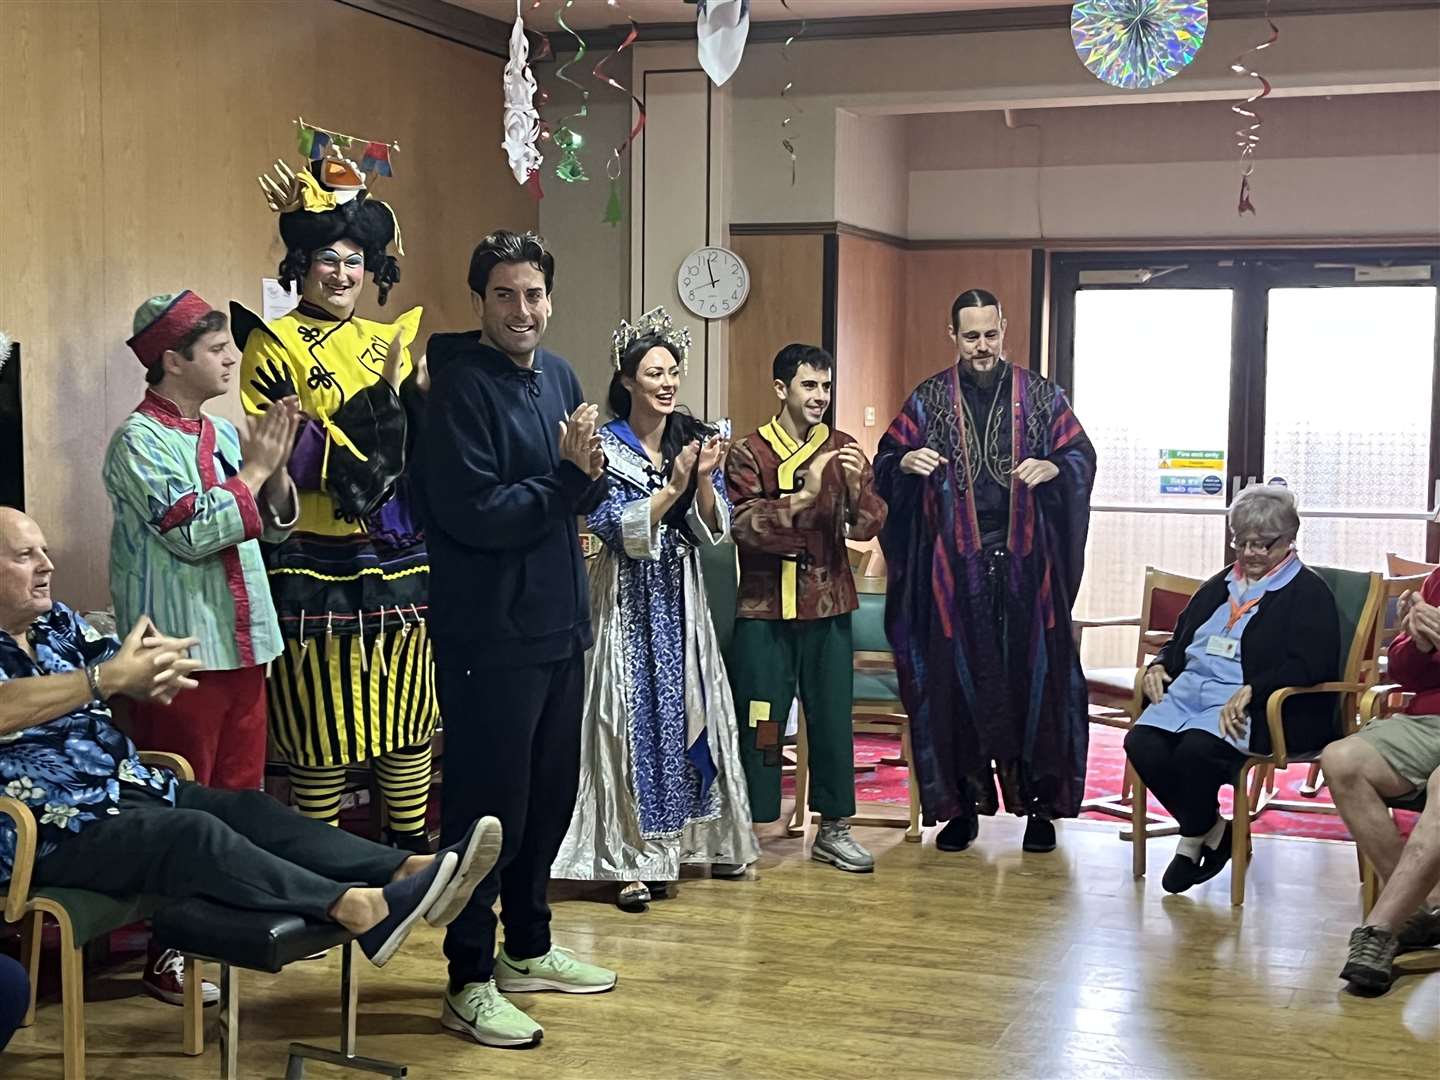 The panto cast, including Towie's James 'Arg' Argent, gate-crashed a seated exercise class to surprise hospice patients